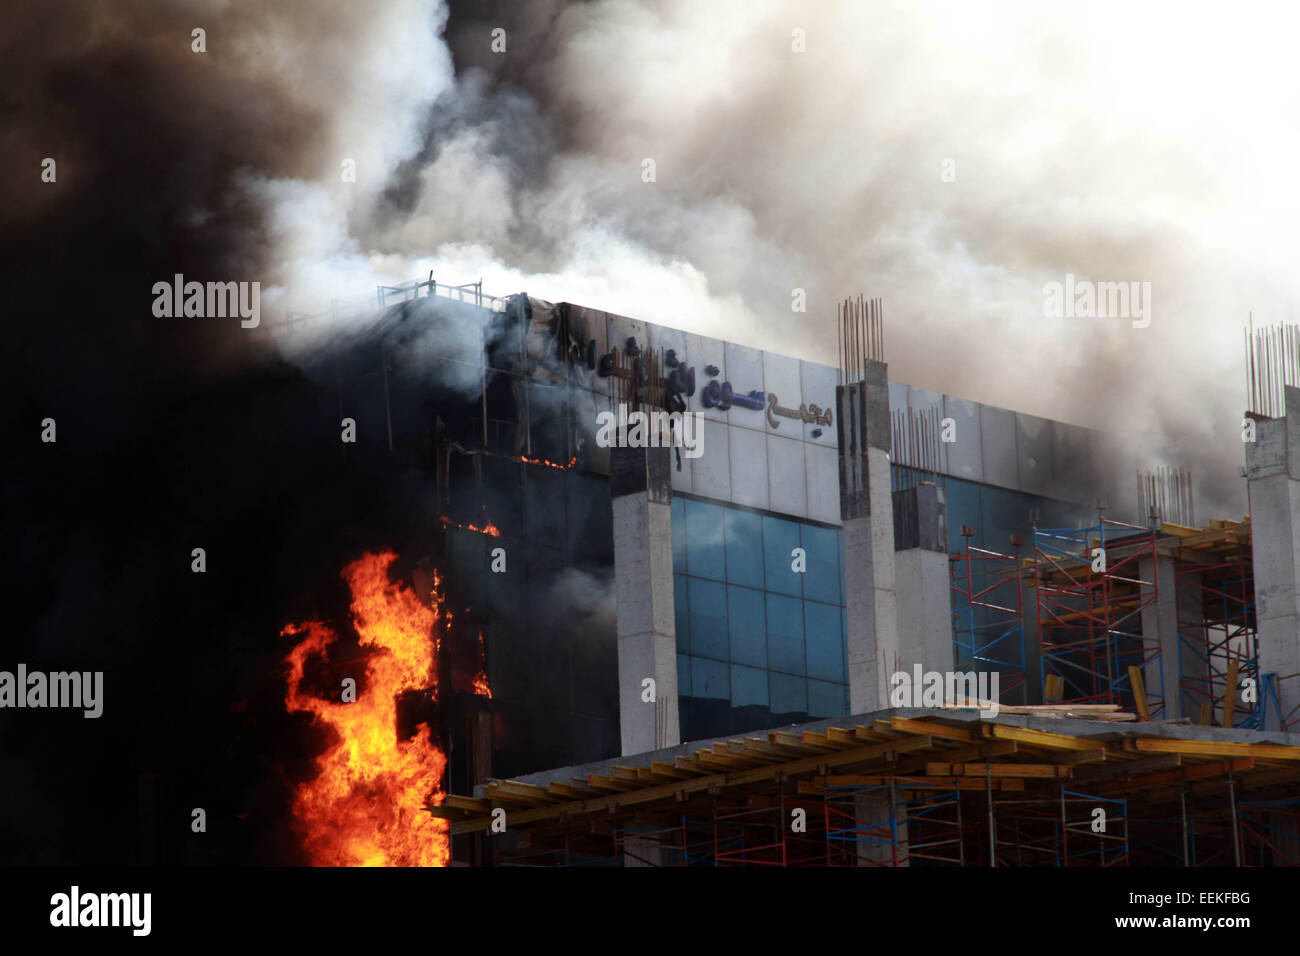 (150119) -- TRIPOLI(LIBYA), Jan. 19, 2015 (Xinhua) -- Flame and smoke rise from a major shopping mall in Libya's capital of Tripoli, on Jan. 19, 2015. The shopping mall, named MAX, caught on fire due to unidentified reasons. (Xinhua/Hamza Turkia) Stock Photo